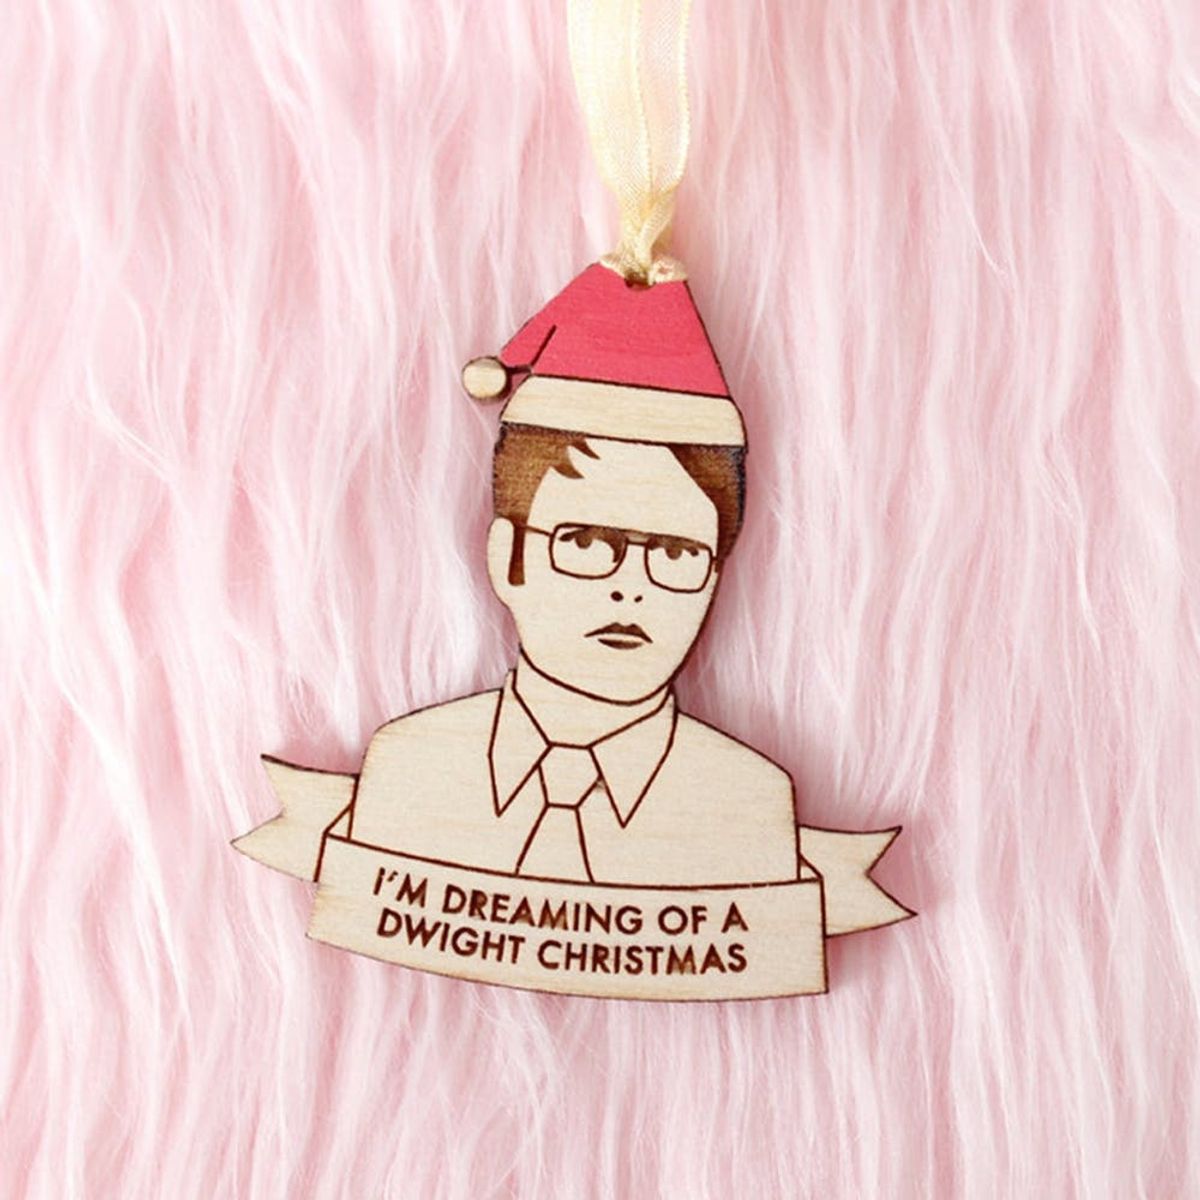 Pun Intended: Laugh Out Loud With These 20 Punny Gifts